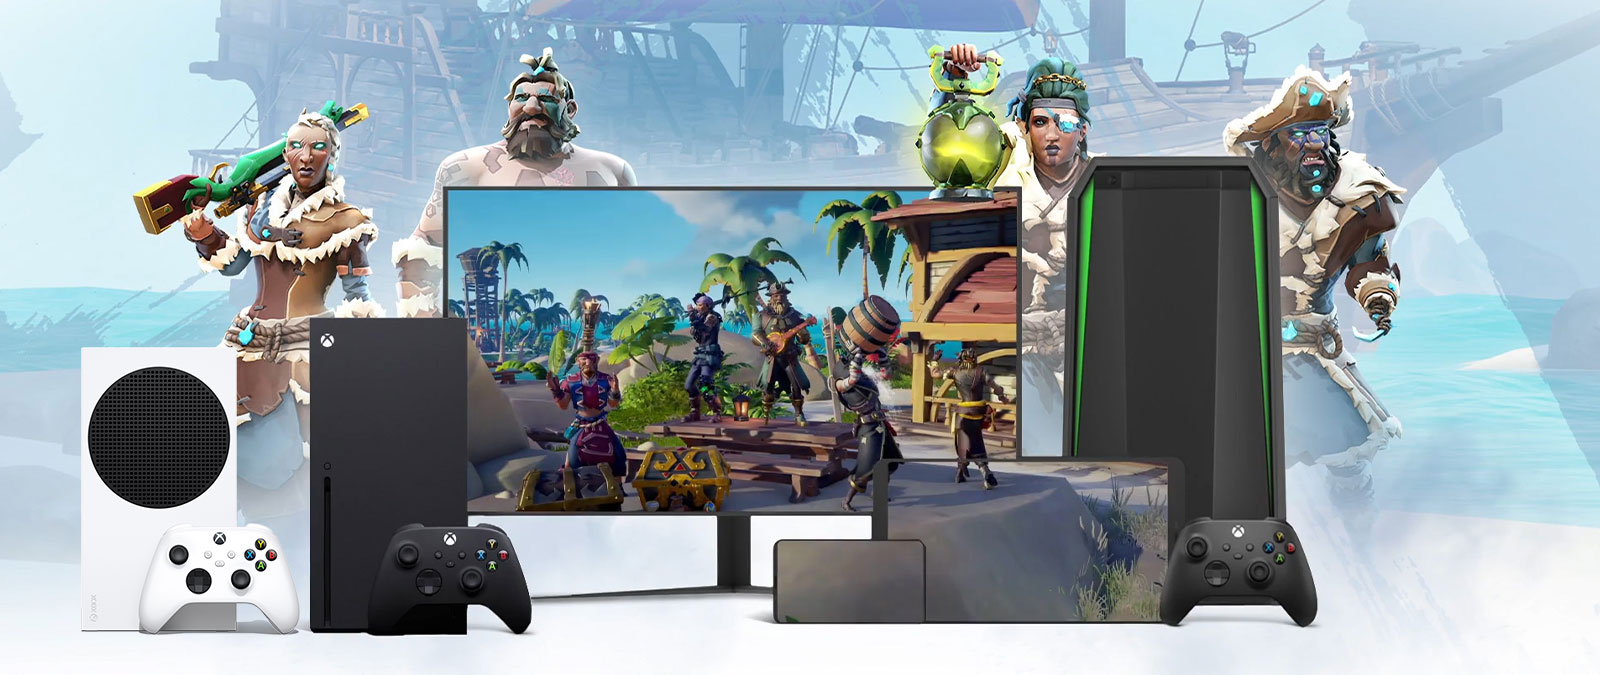 Sea of Thieves characters around the Xbox ecosystem